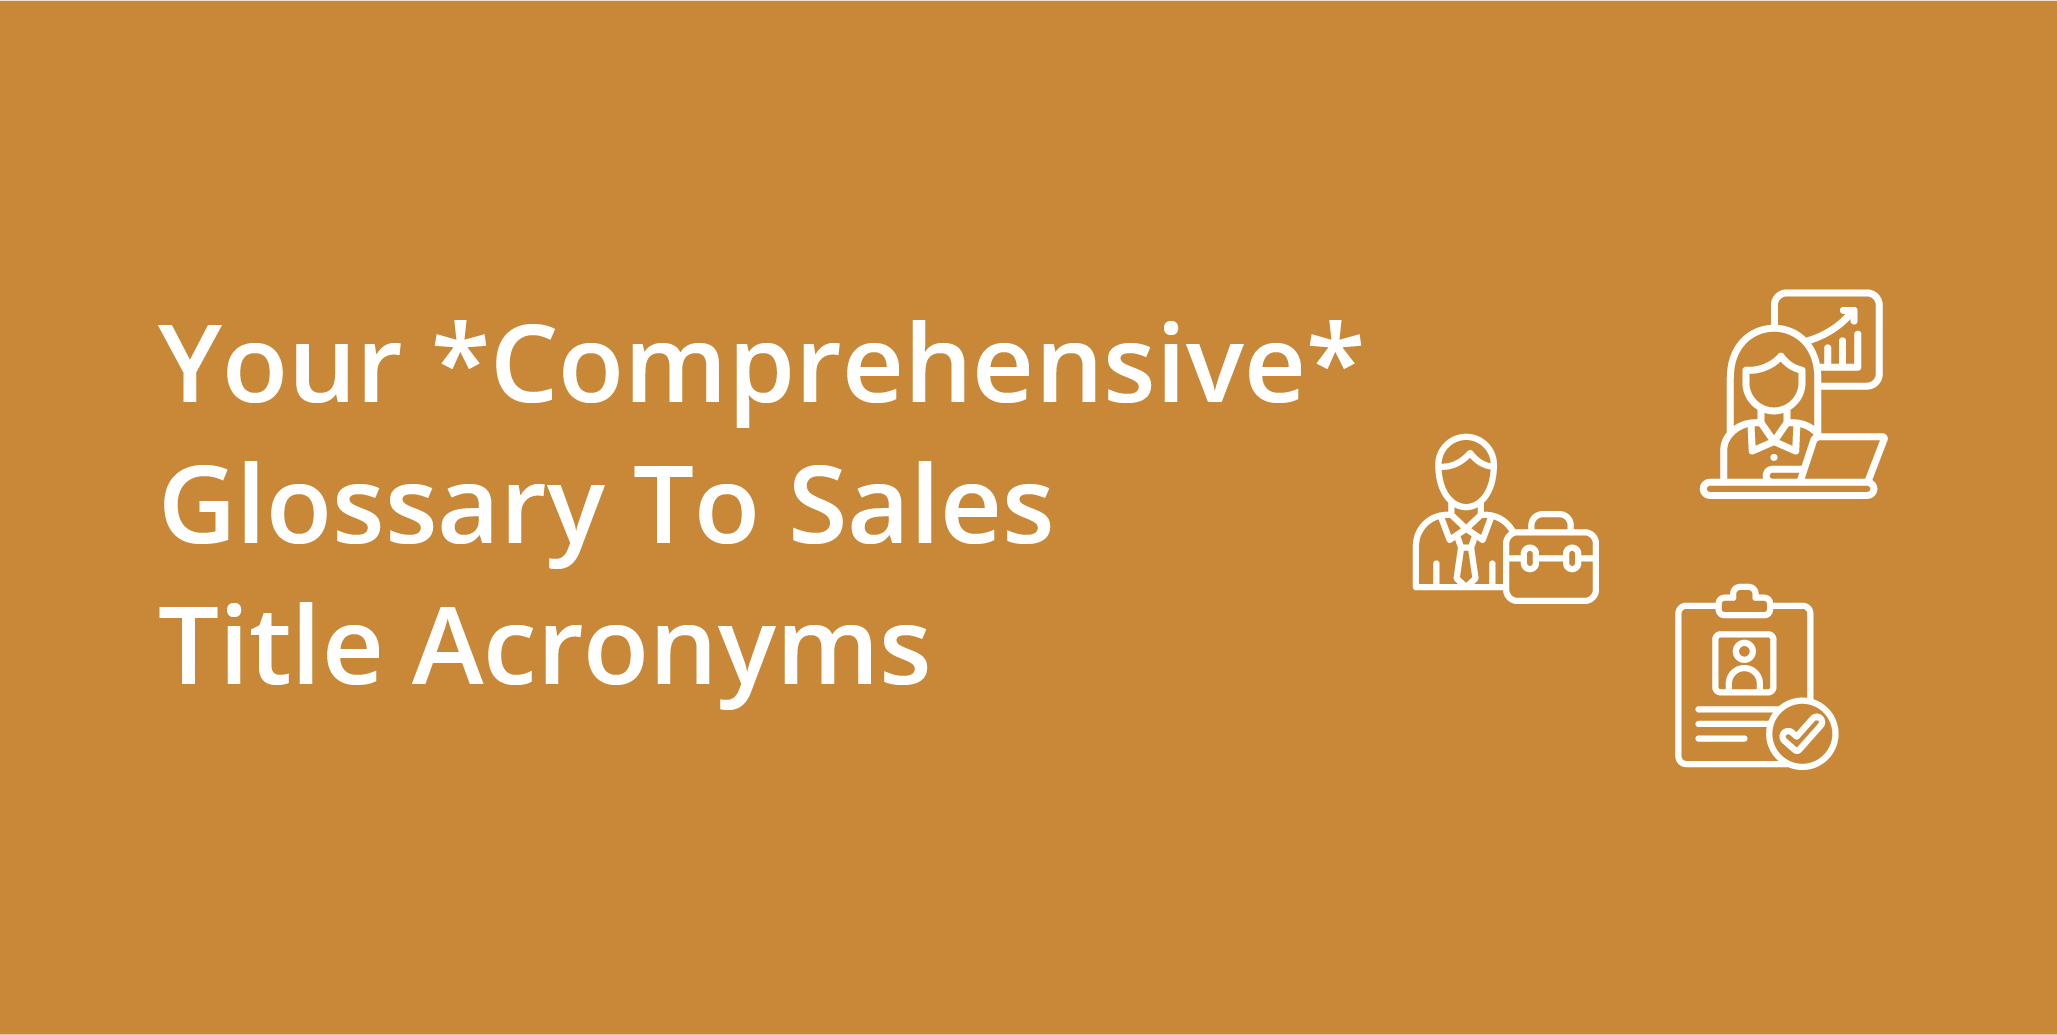 Your *Comprehensive* Glossary To Sales Title Acronyms